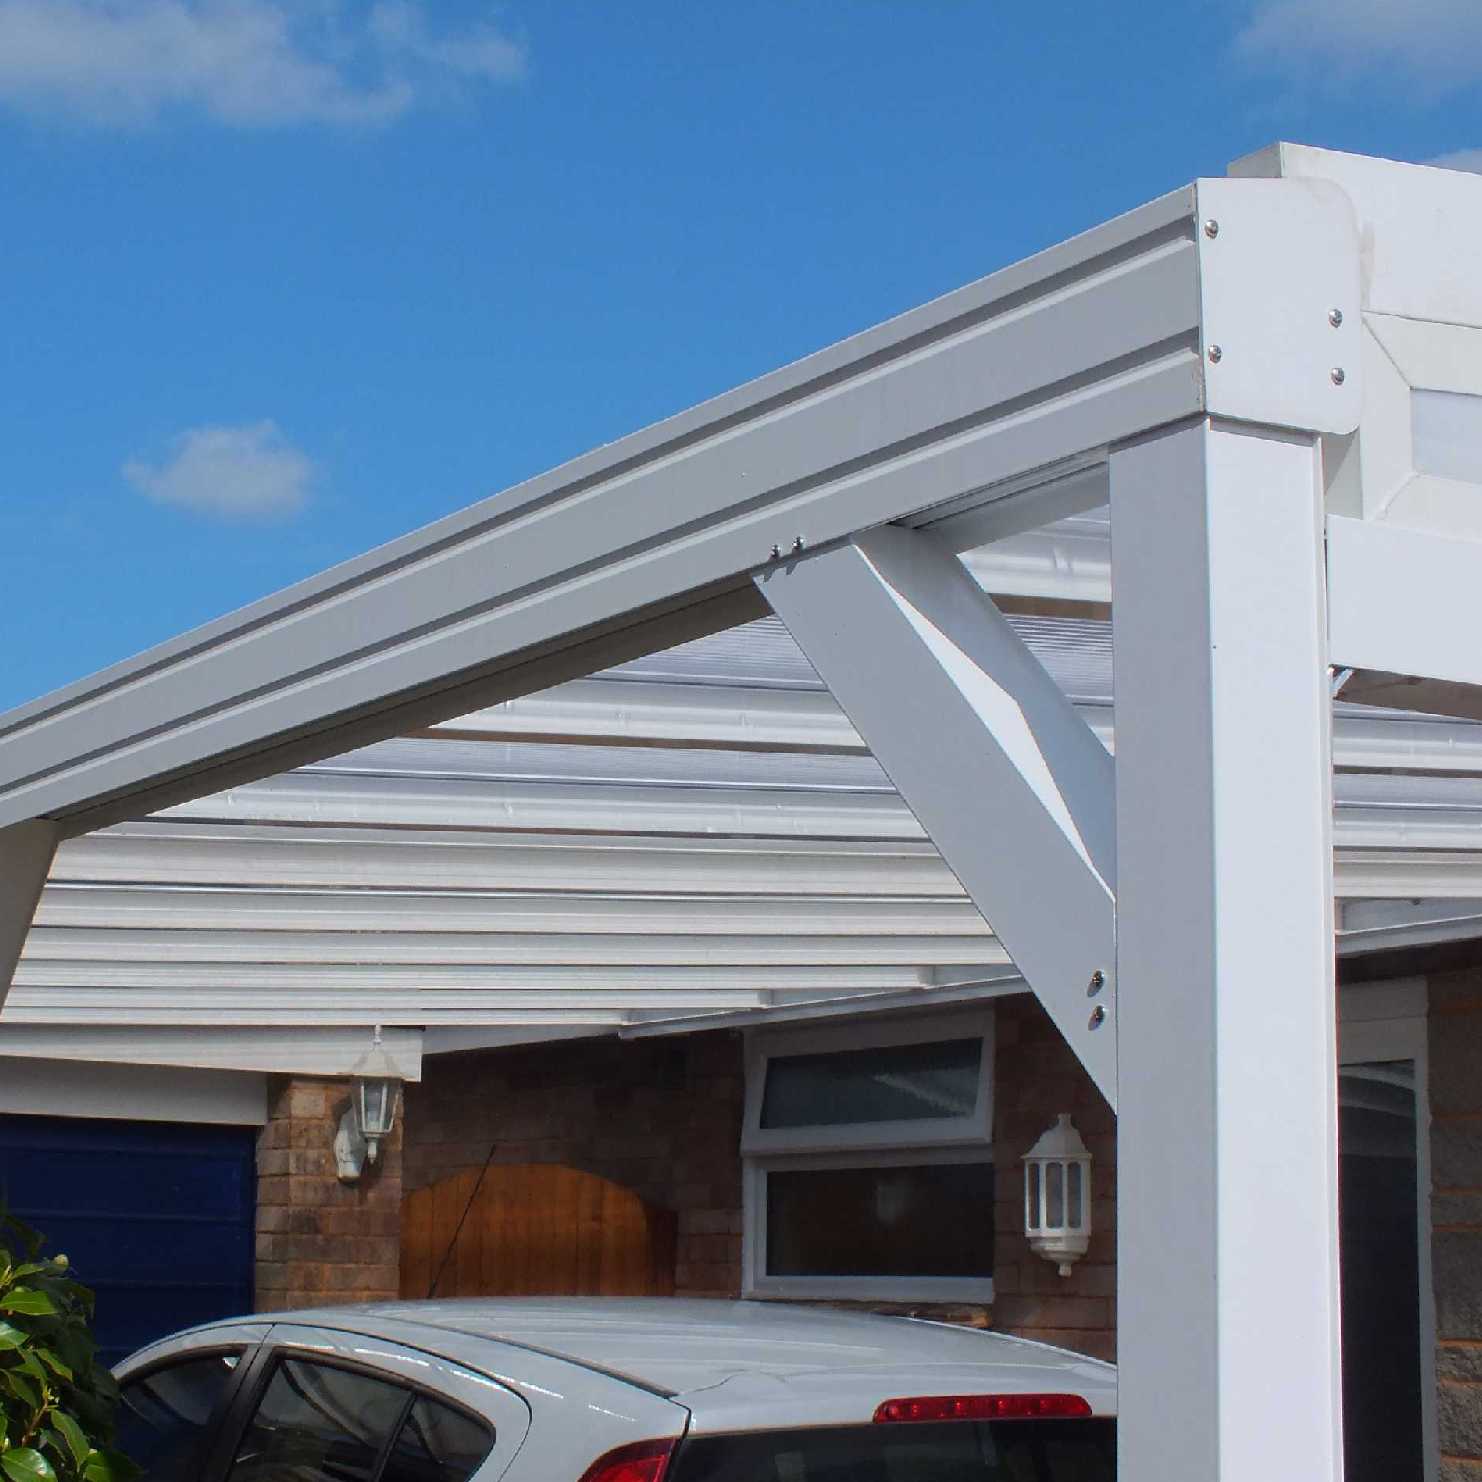 Great deals on Omega Smart Lean-To Canopy, White with 16mm Polycarbonate Glazing - 6.3m (W) x 4.5m (P), (4) Supporting Posts